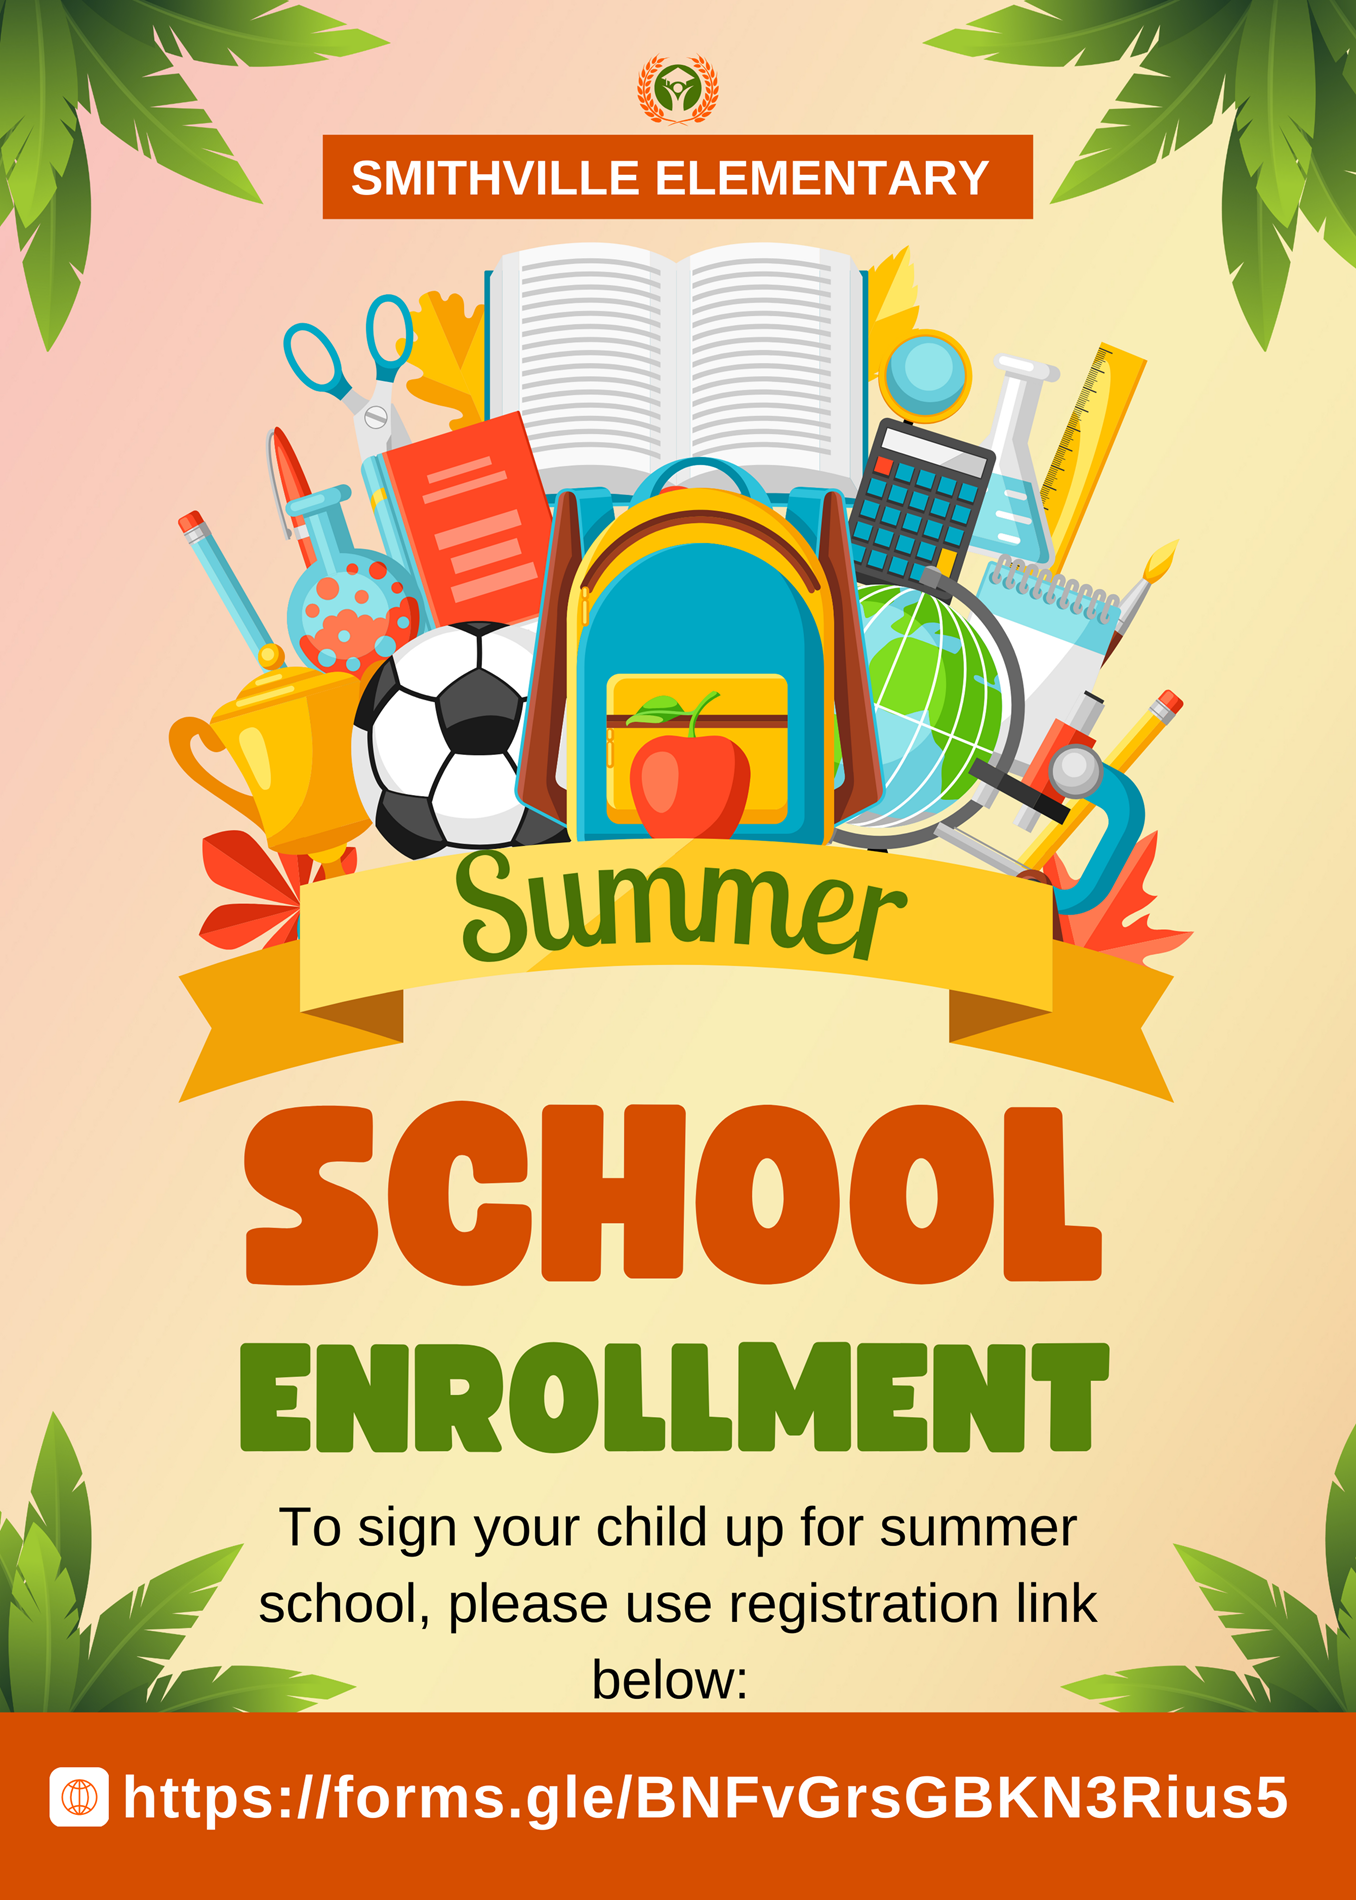 Click the image to register for summer school